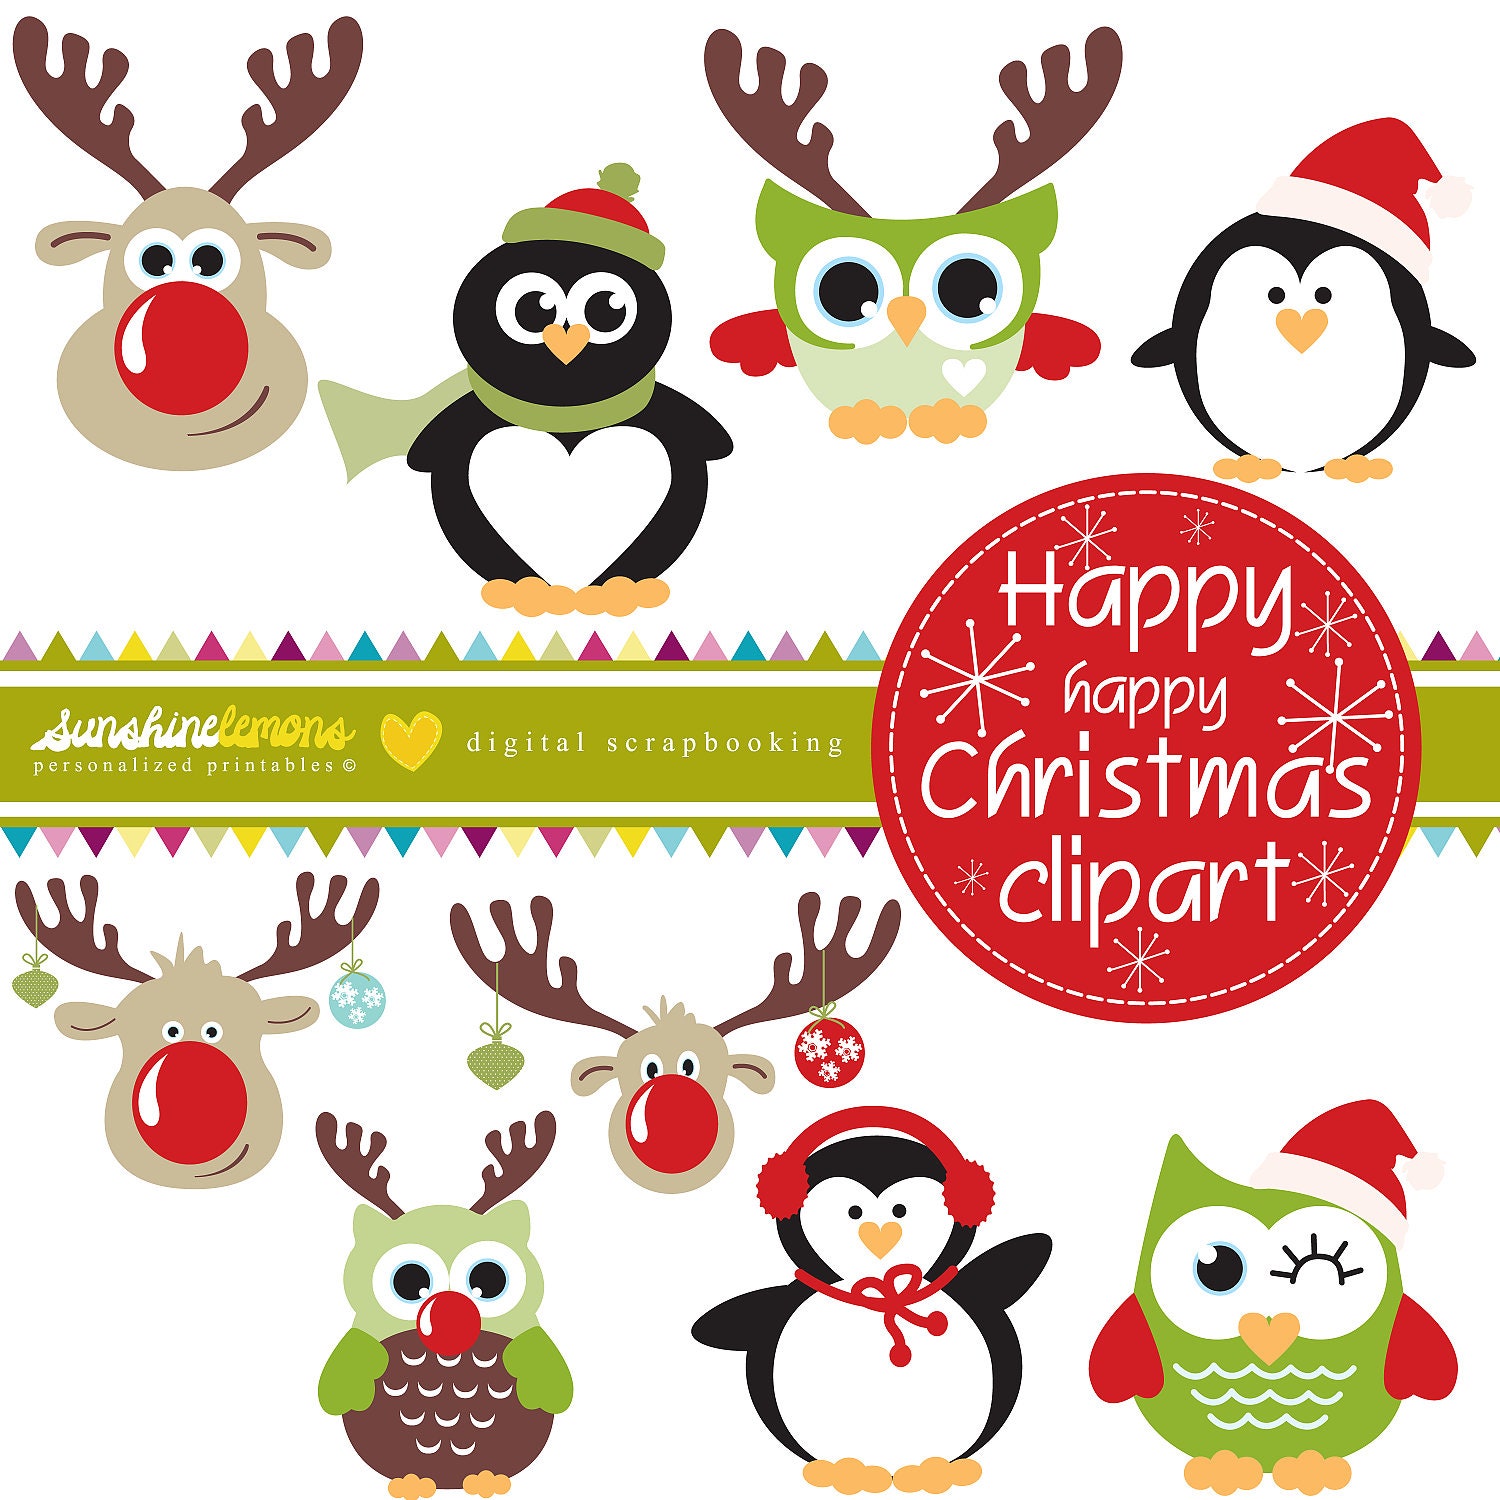 christmas clipart and images - photo #47